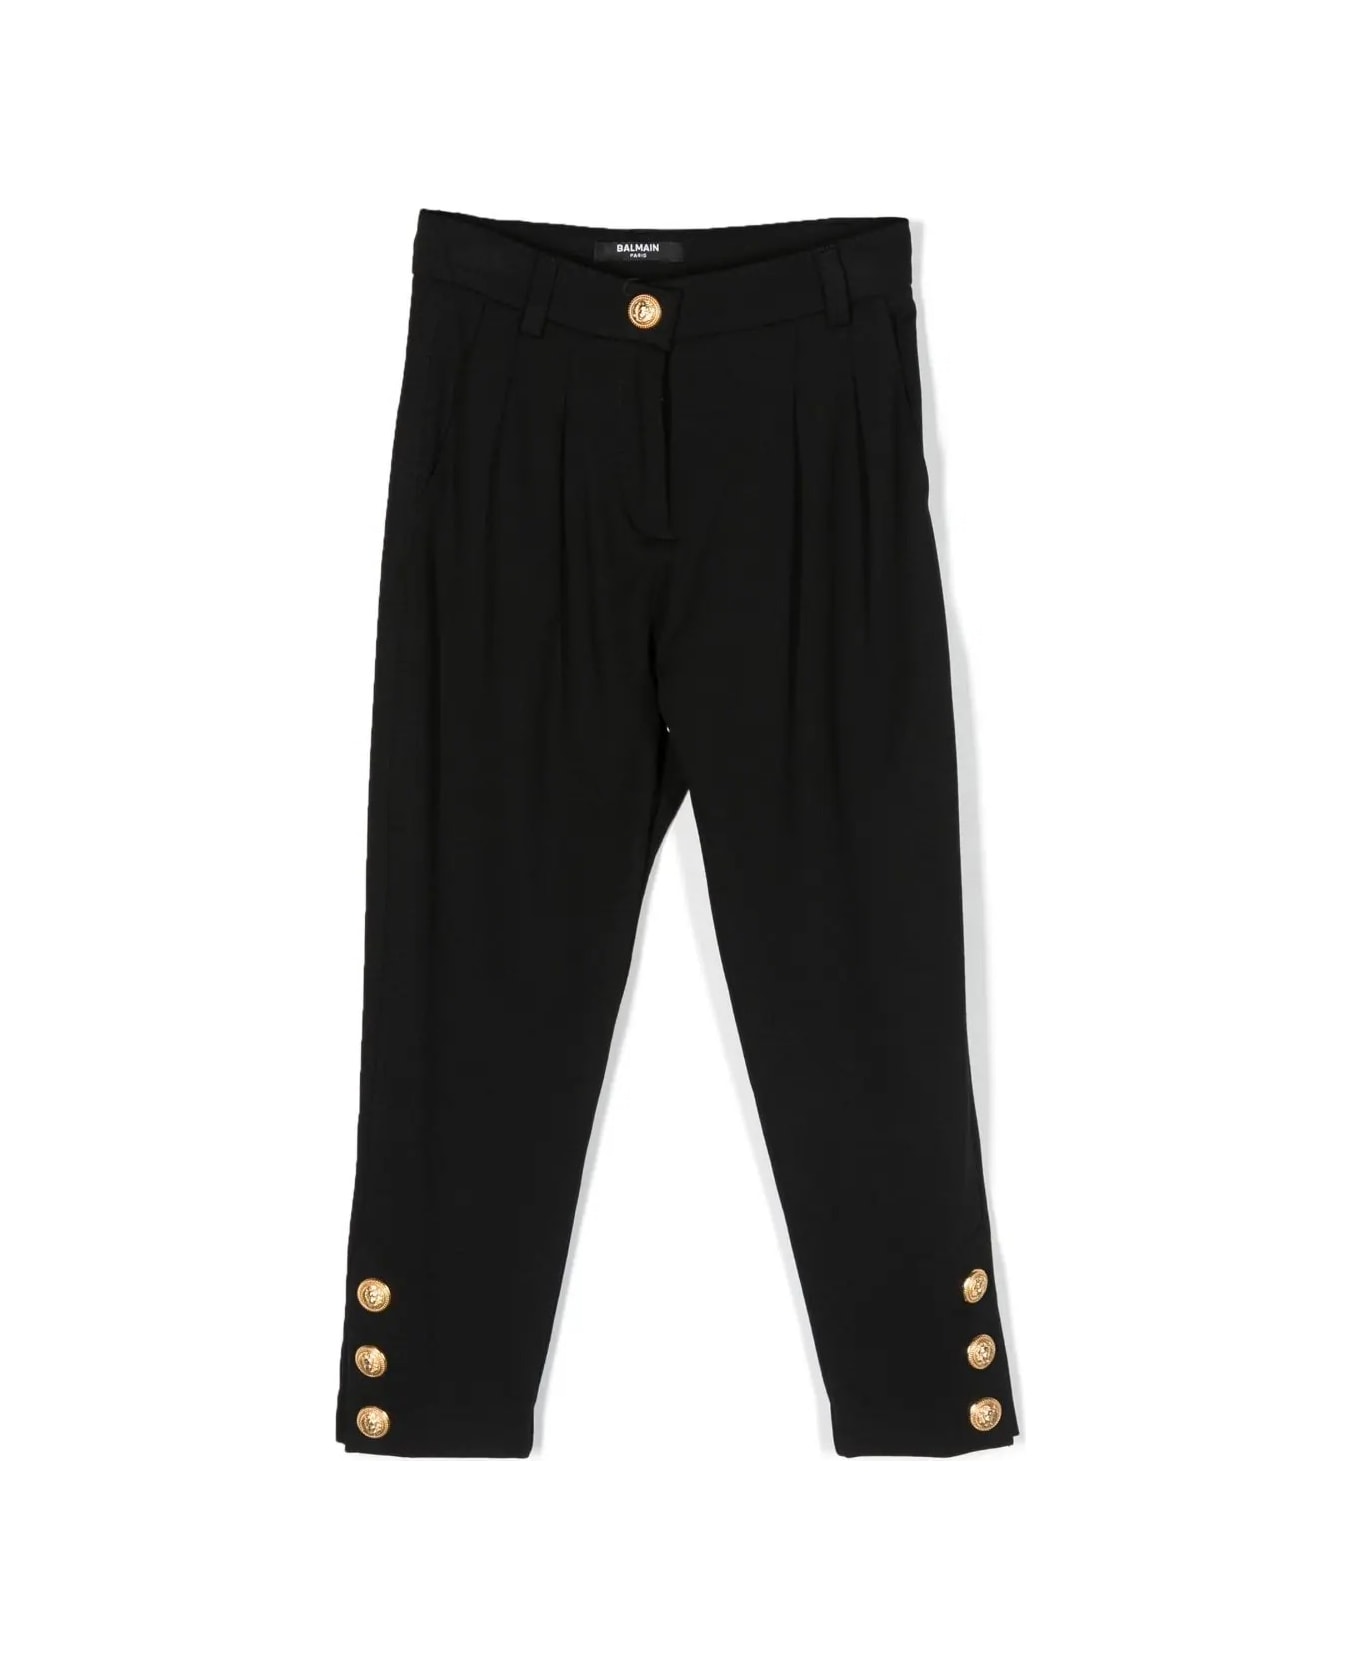 Balmain Black High Waist Pants With Gold Embossed Buttons - black